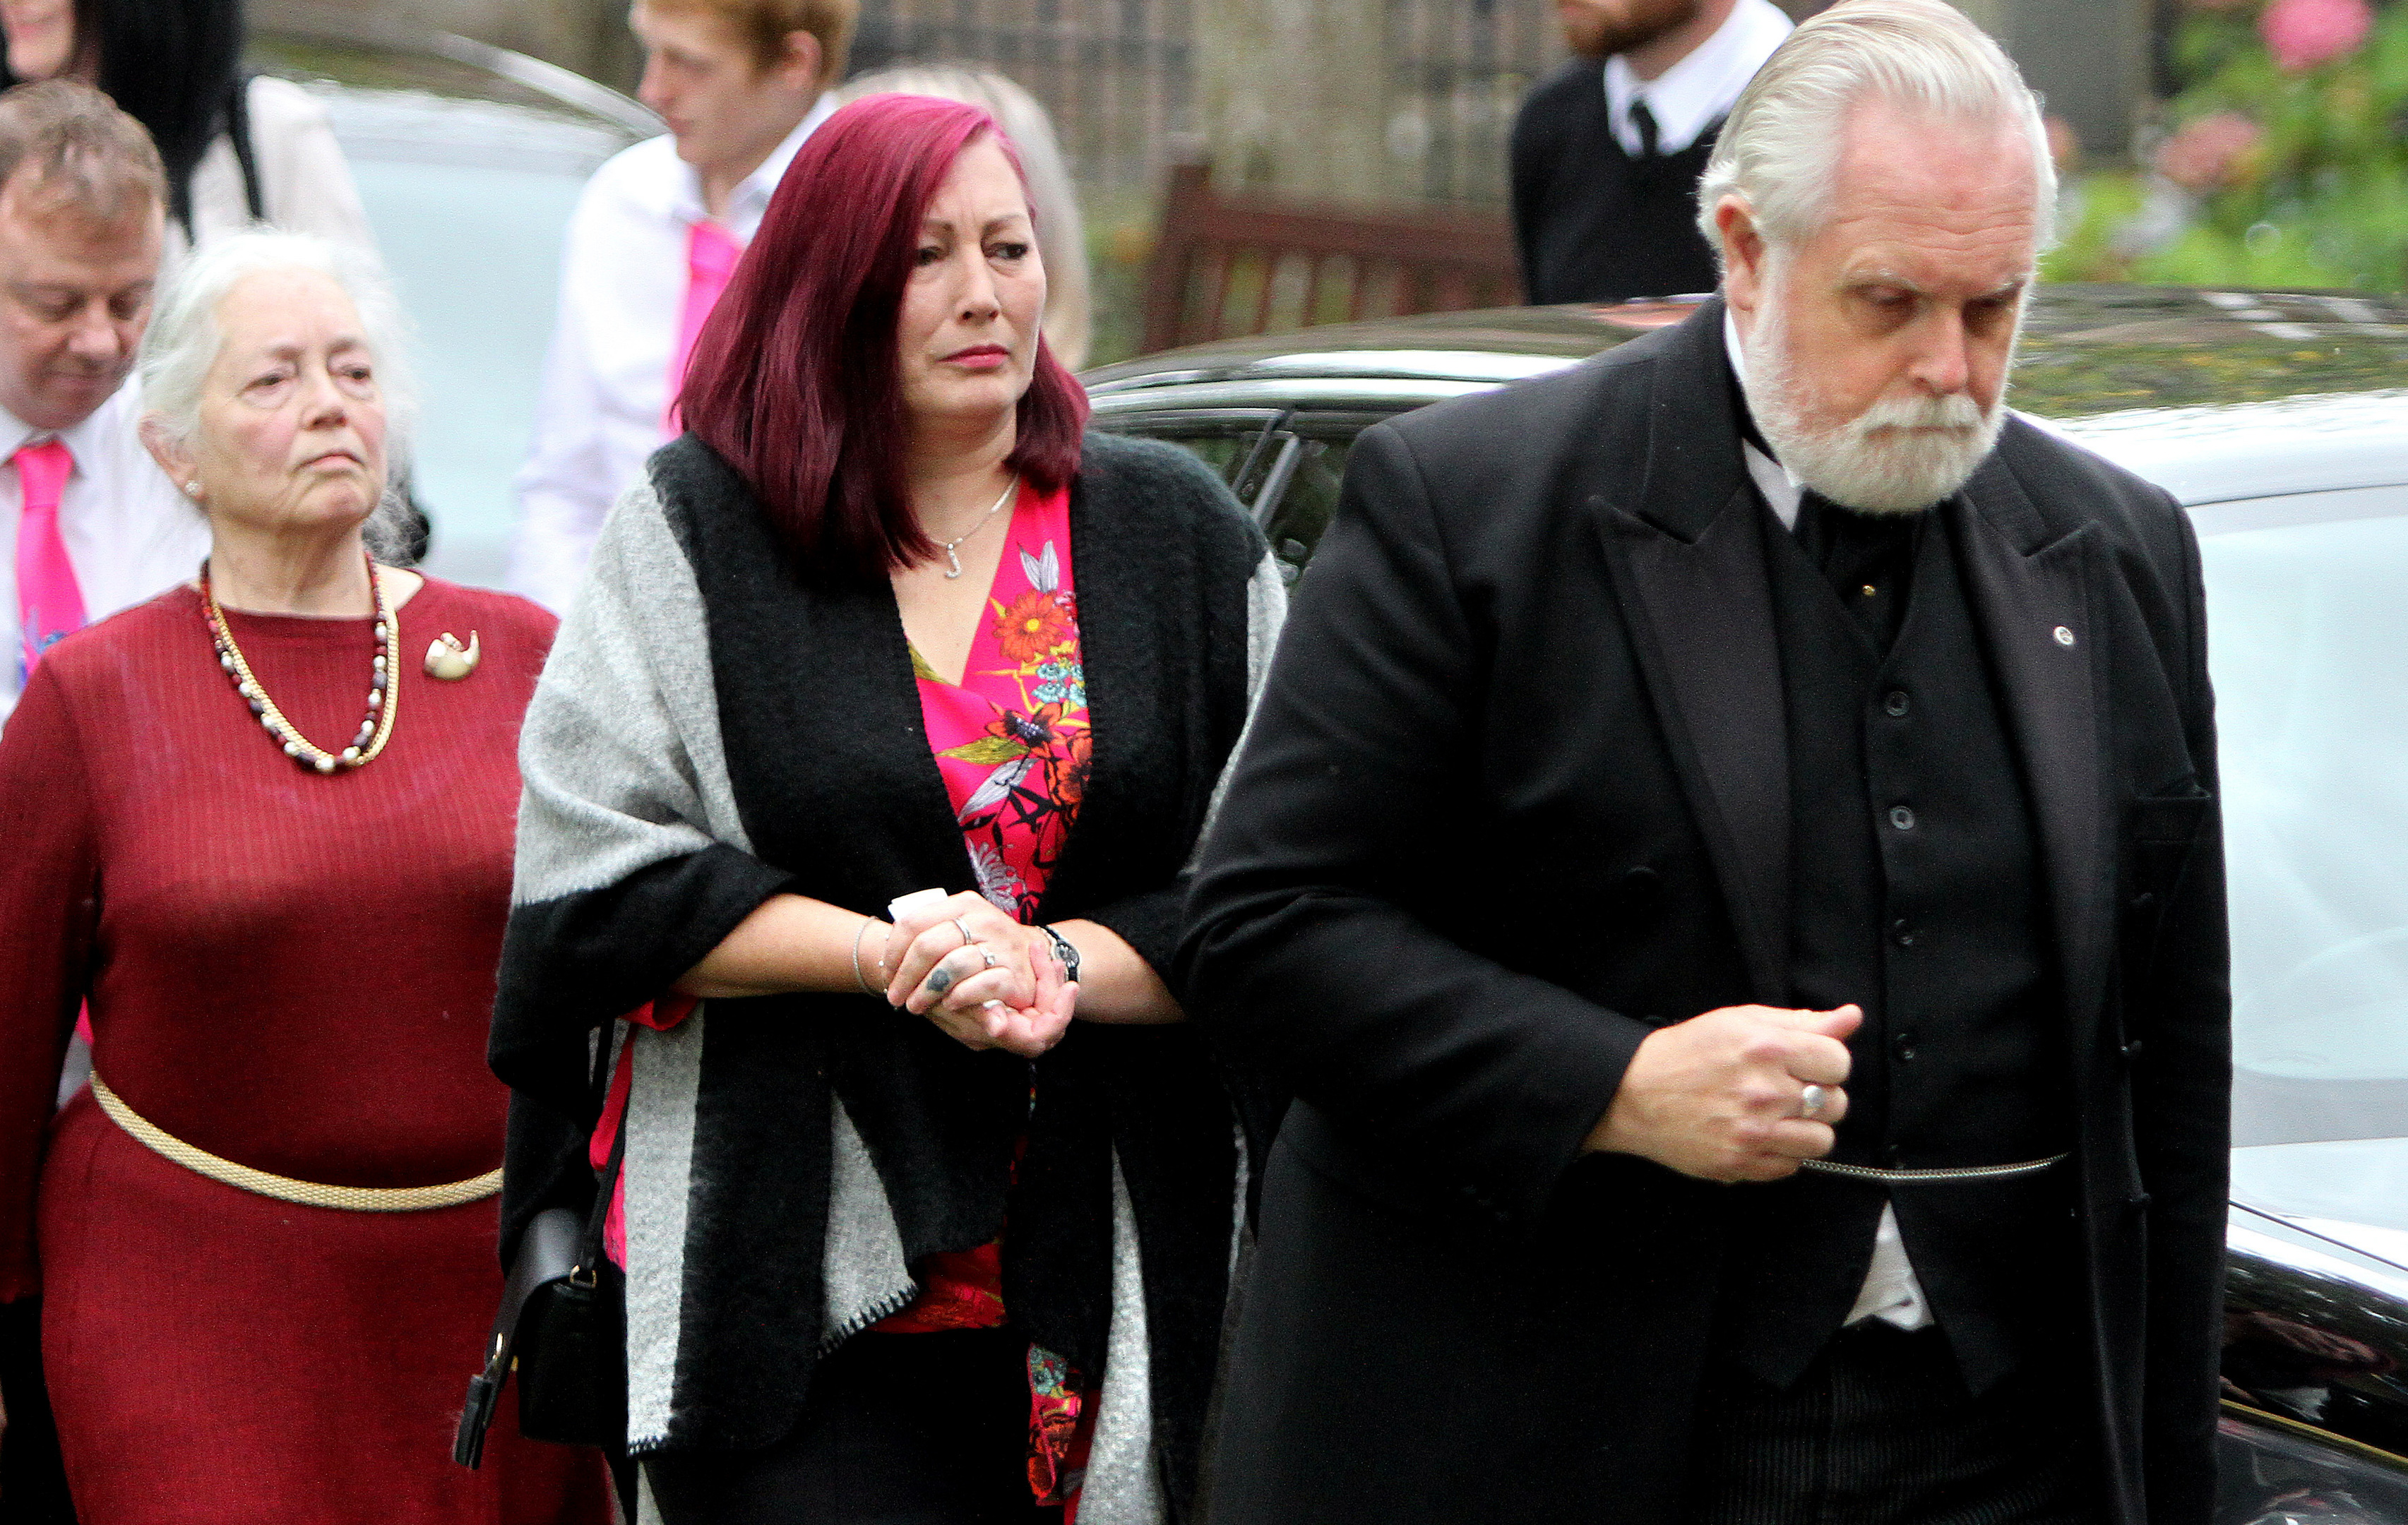 Libbi's family arriving at Brechin Cathedral.